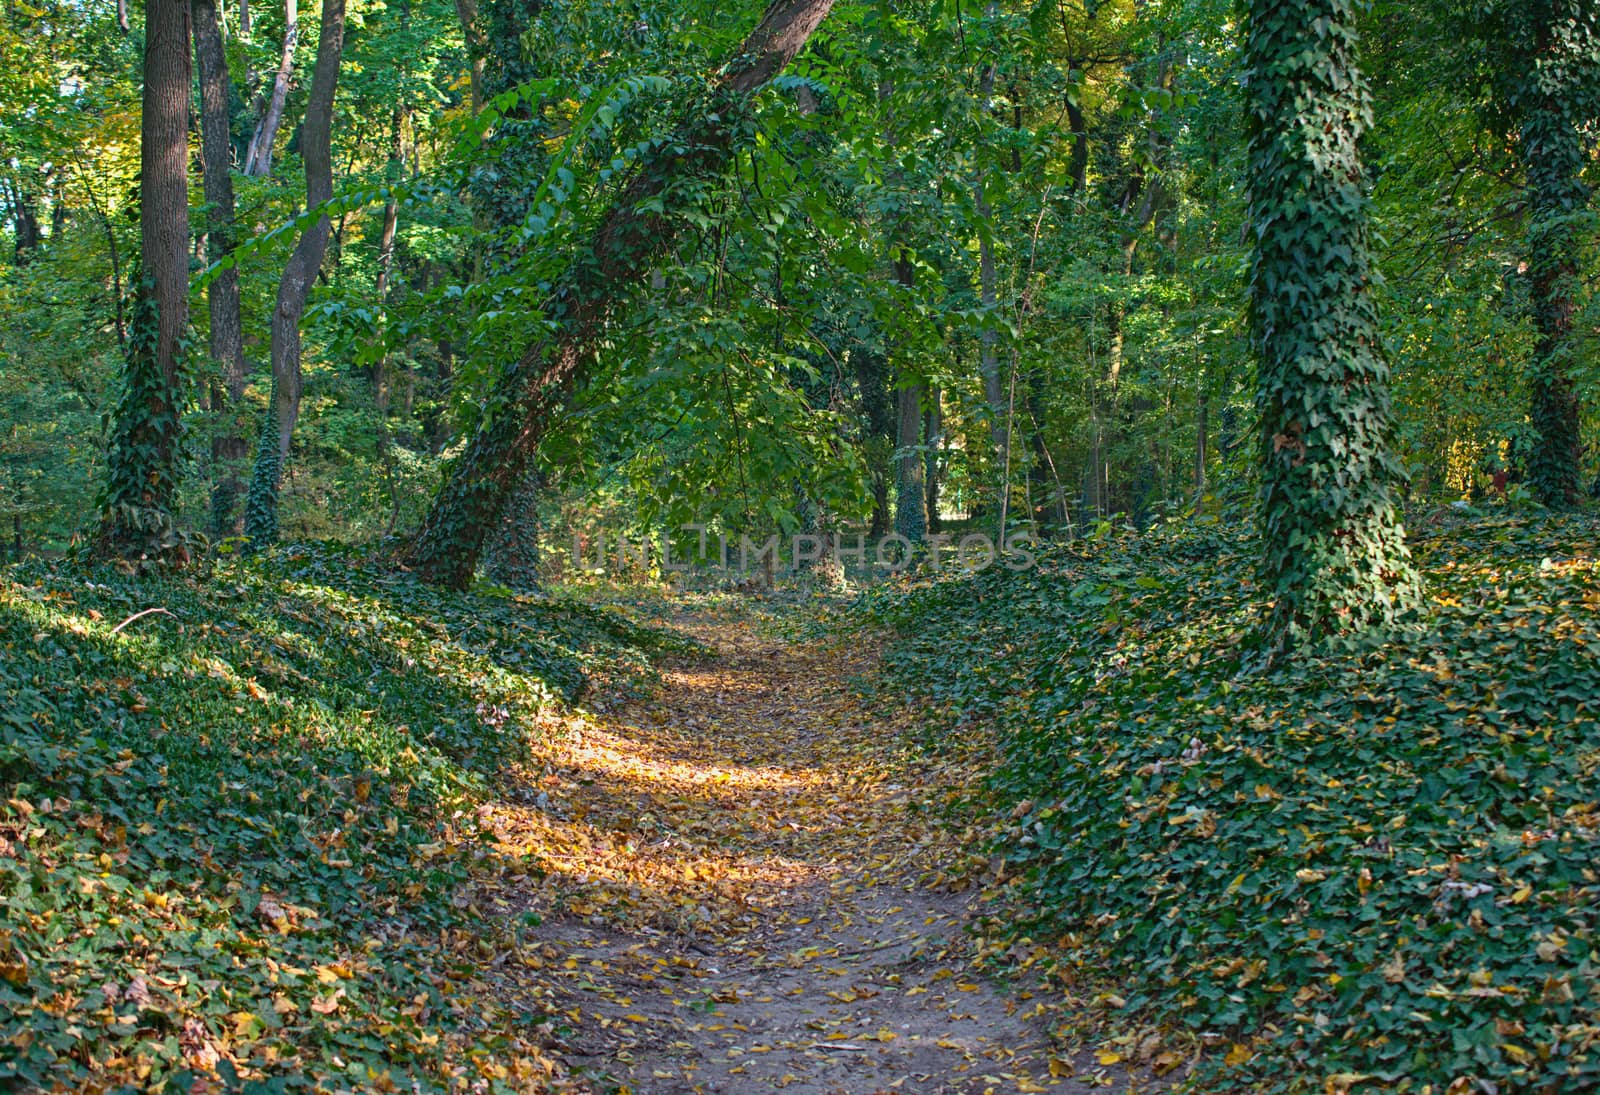 Footpath in park covered with fallen leaves and tree trunks with creepers by sheriffkule